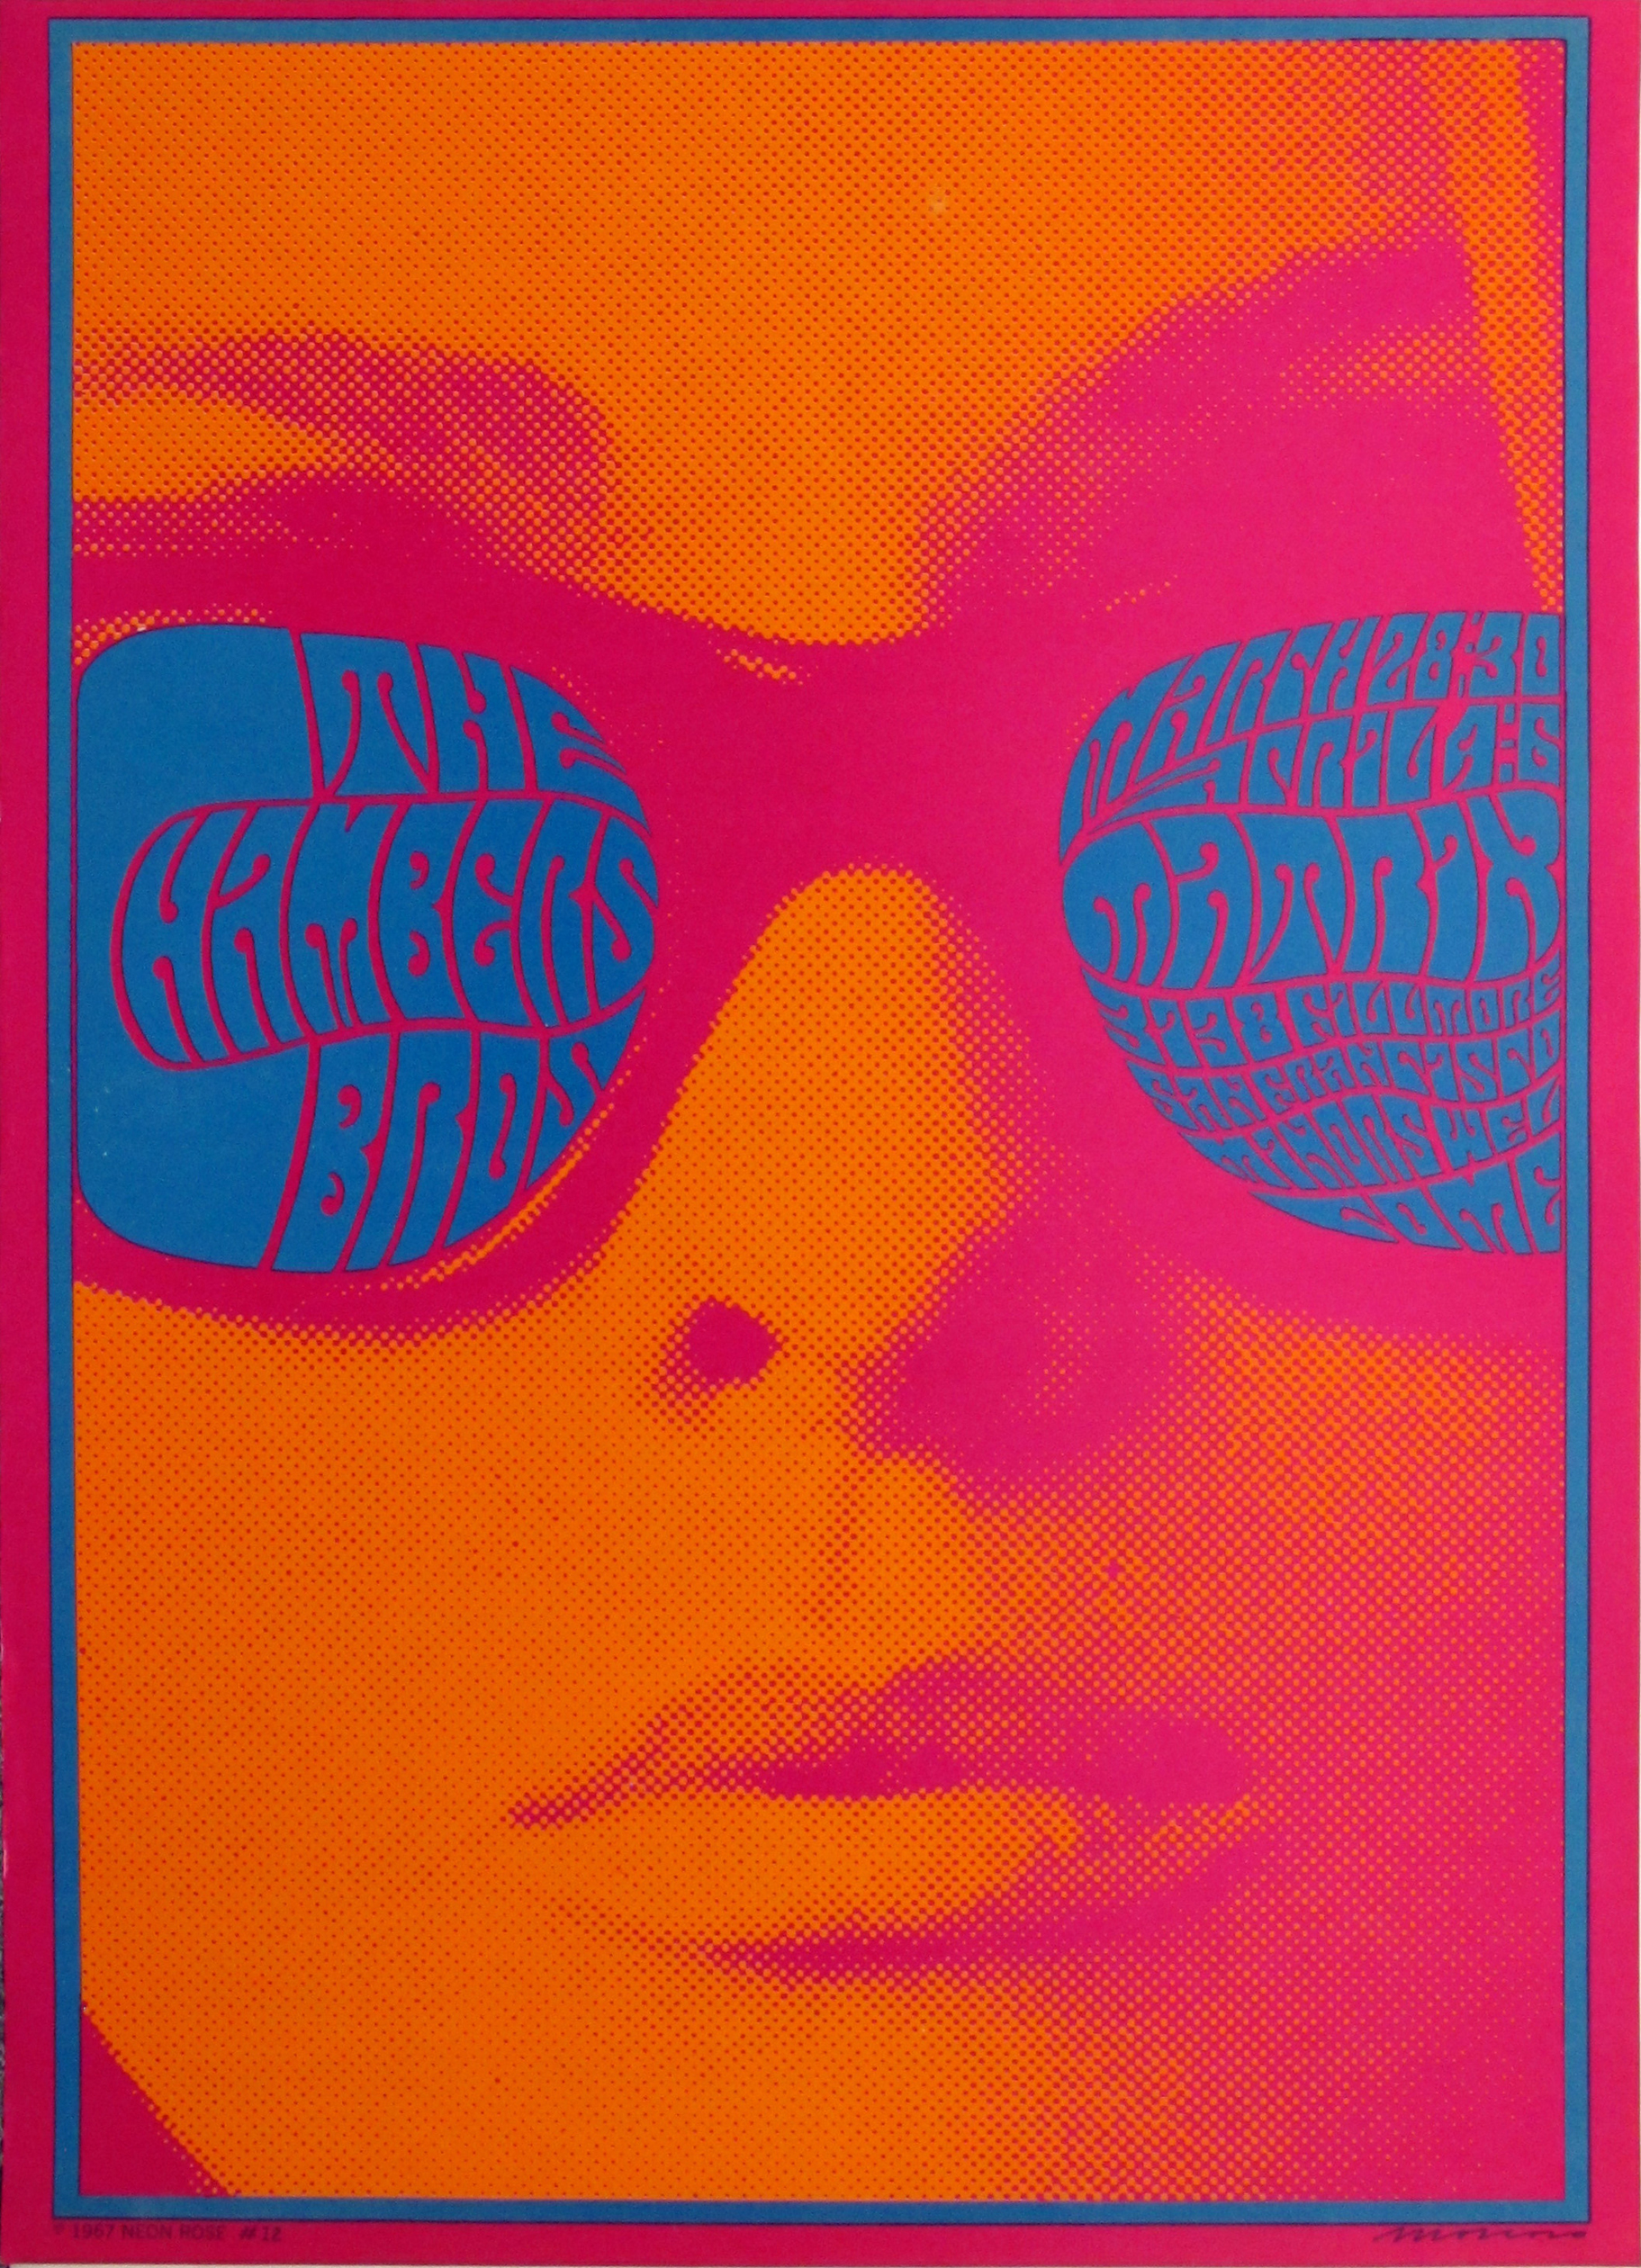 The Chambers Brothers Concert Poster.